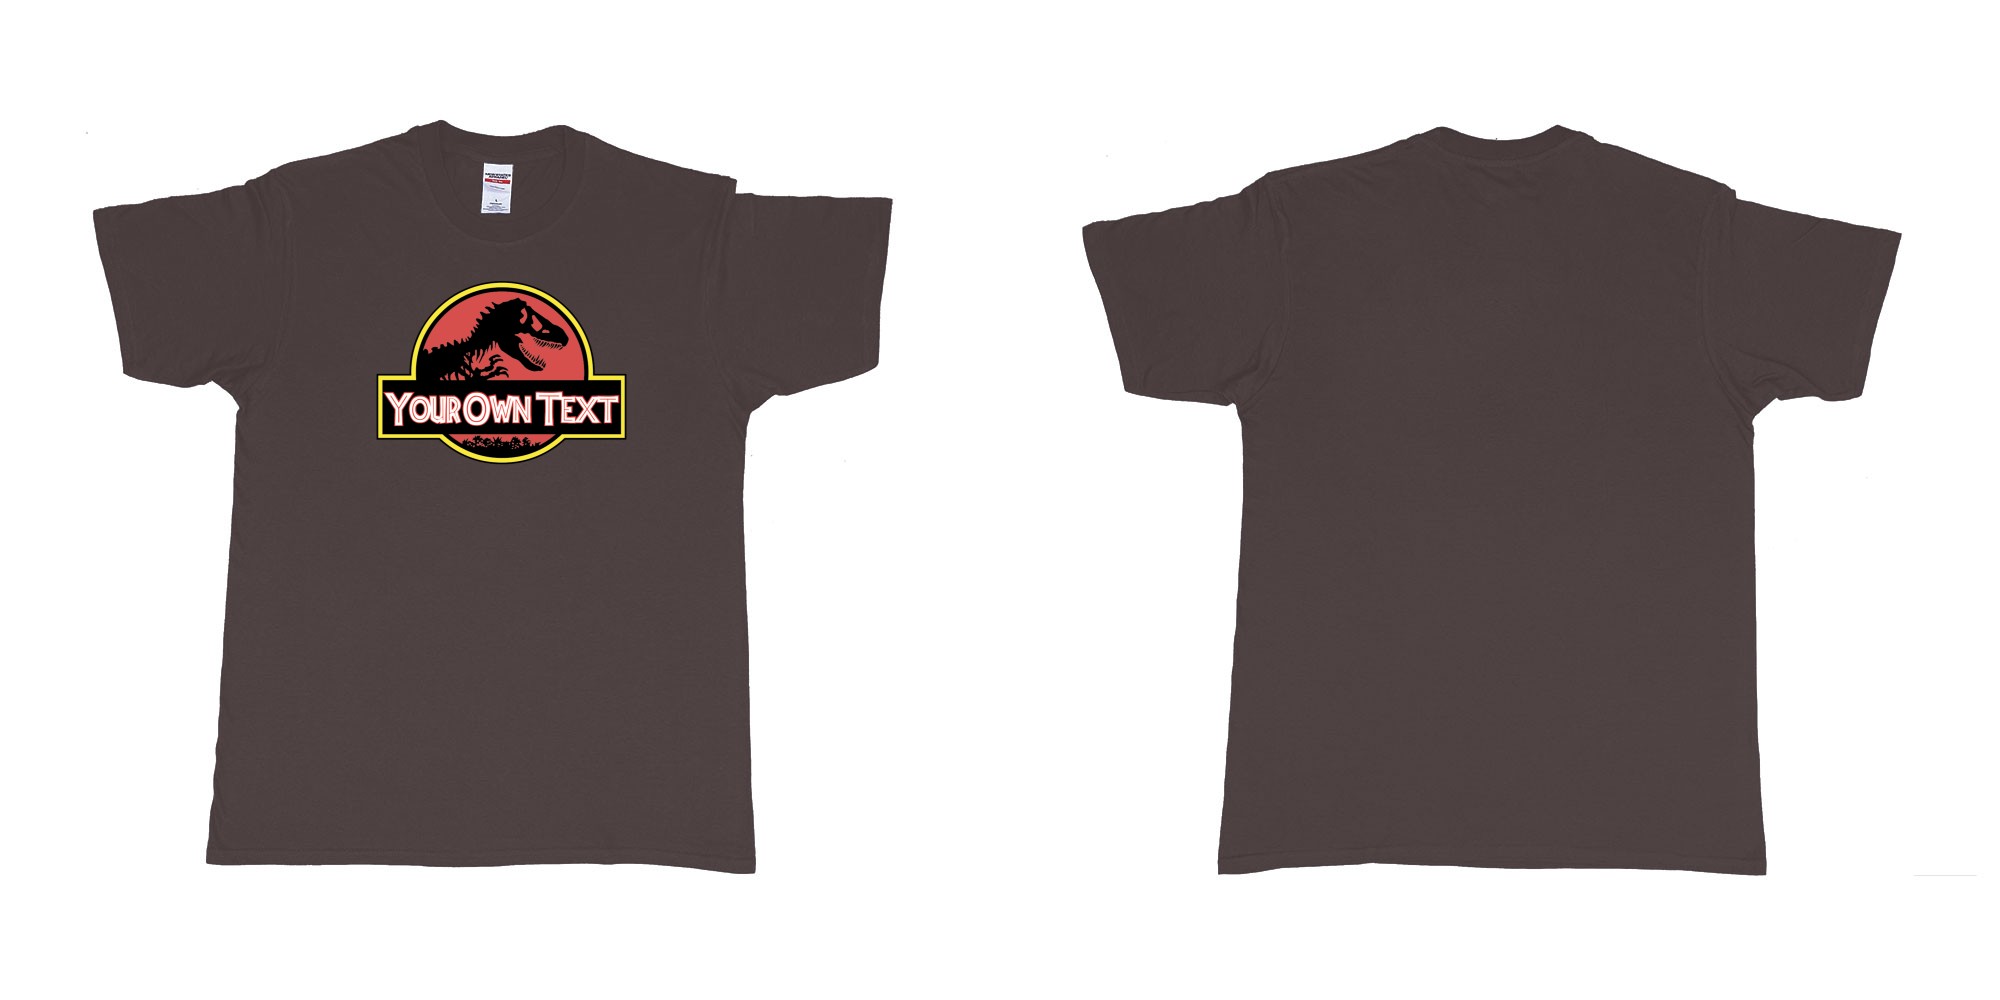 Custom tshirt design Jurassic Park in fabric color dark-chocolate choice your own text made in Bali by The Pirate Way